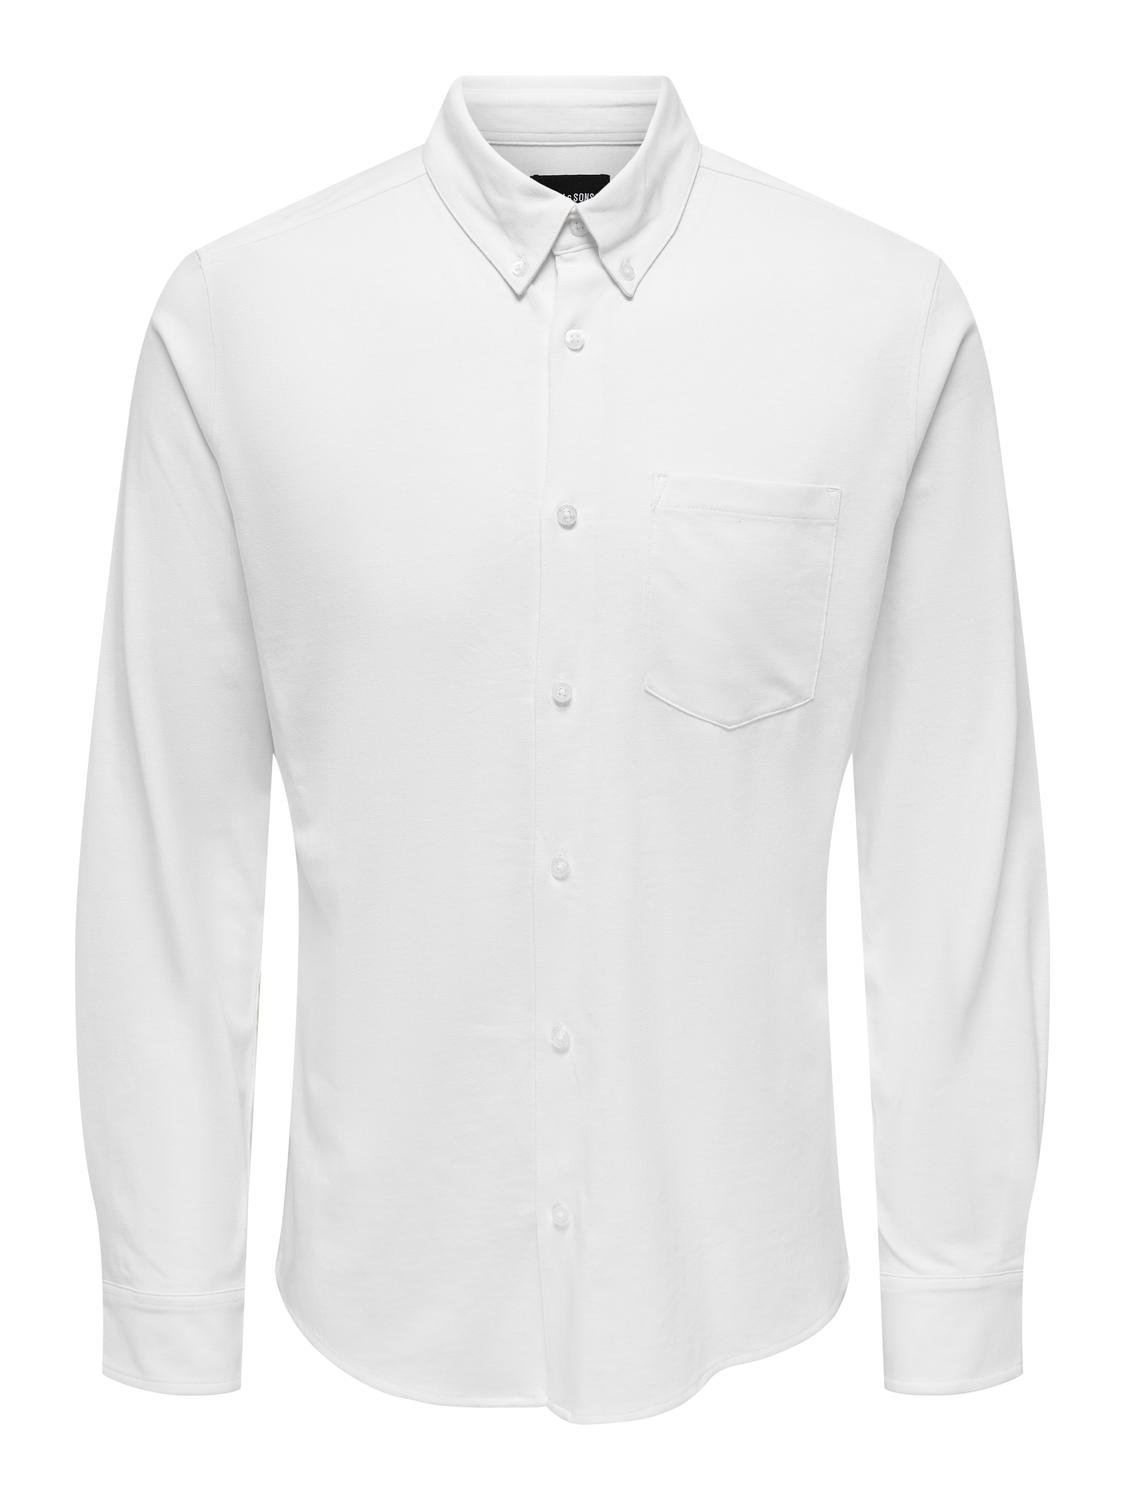 ONLY & SONS Classic shirt -Bright White - 22027665